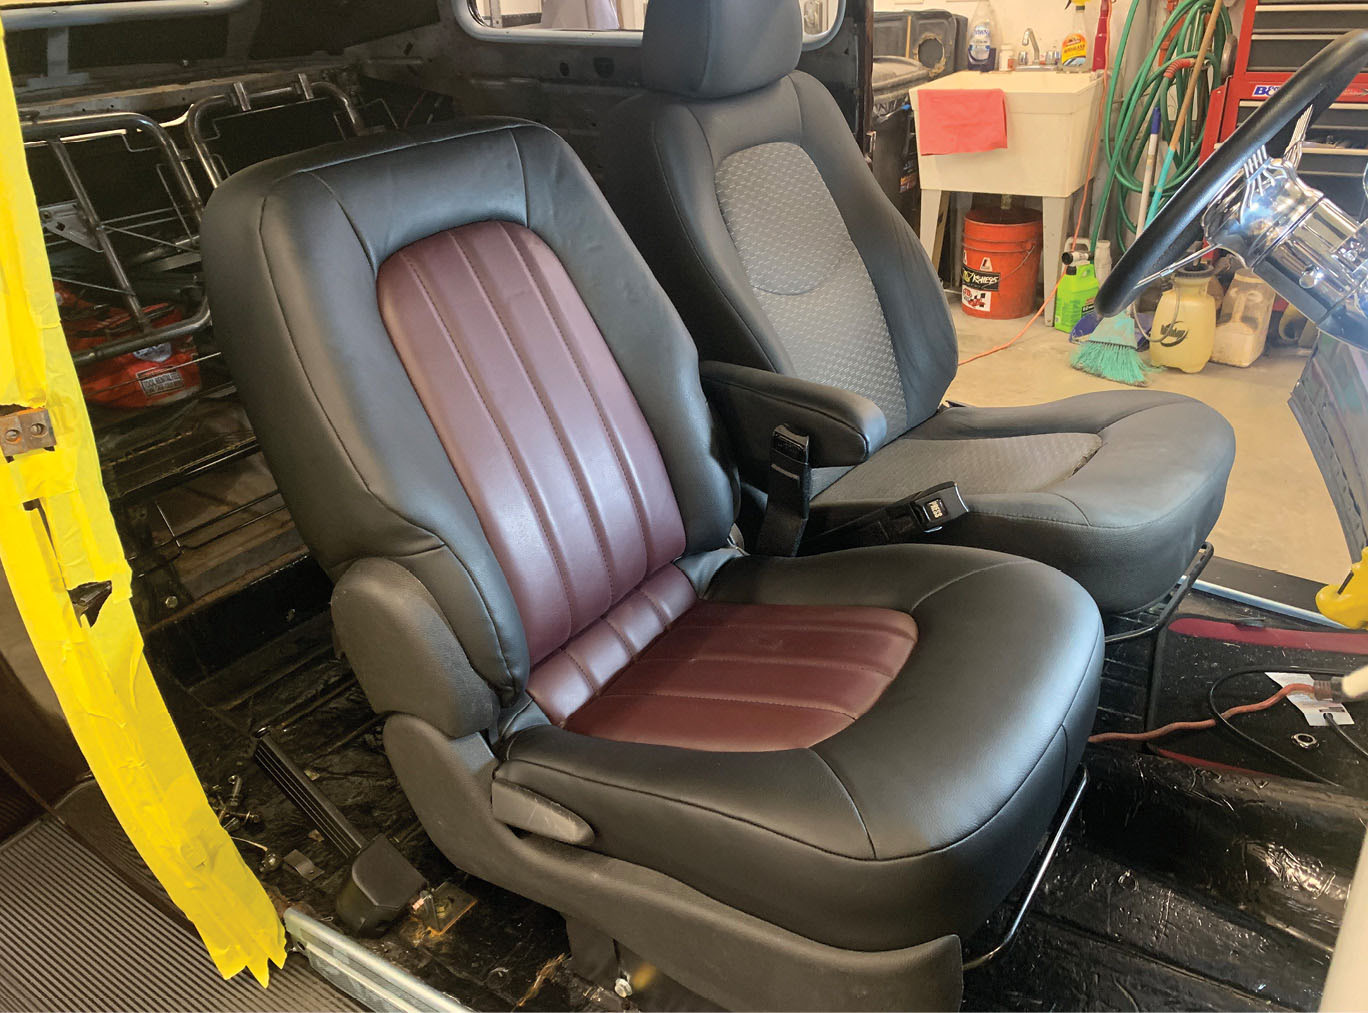 A before and after shot of the seats in Winter’s ’36 Ford. On the far side is an original HHR seat—compare it to the reupholstered version closer to the camera.